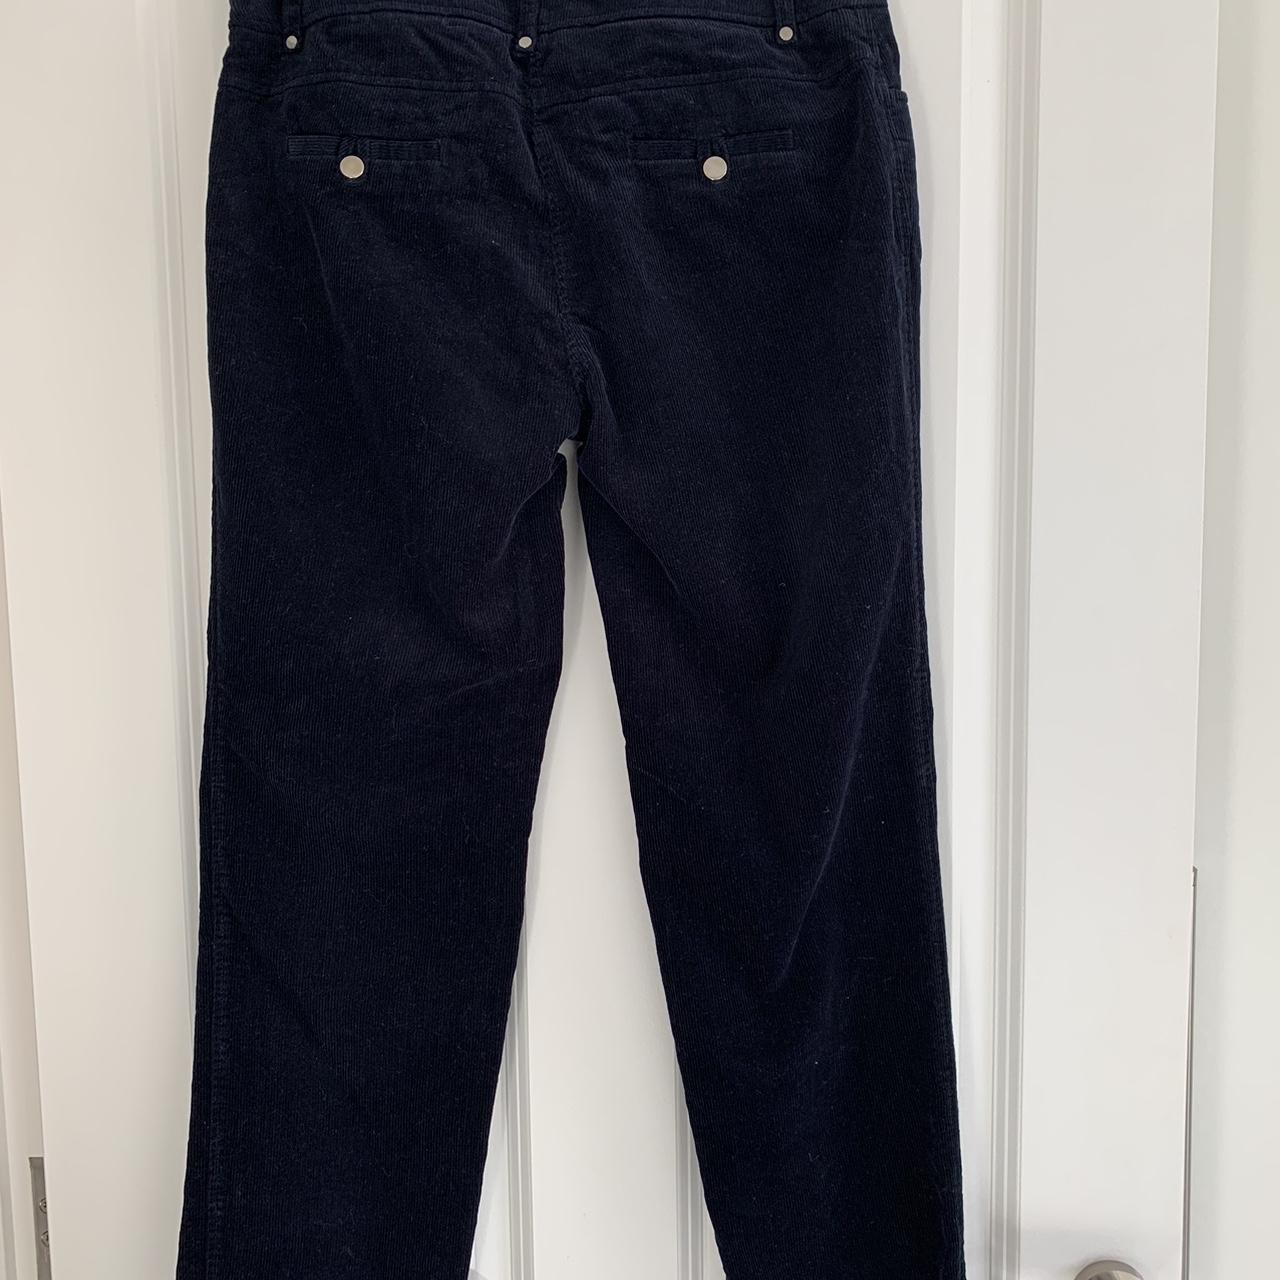 Jaeger Black Corduroy Trousers Size 10 Overall... - Depop